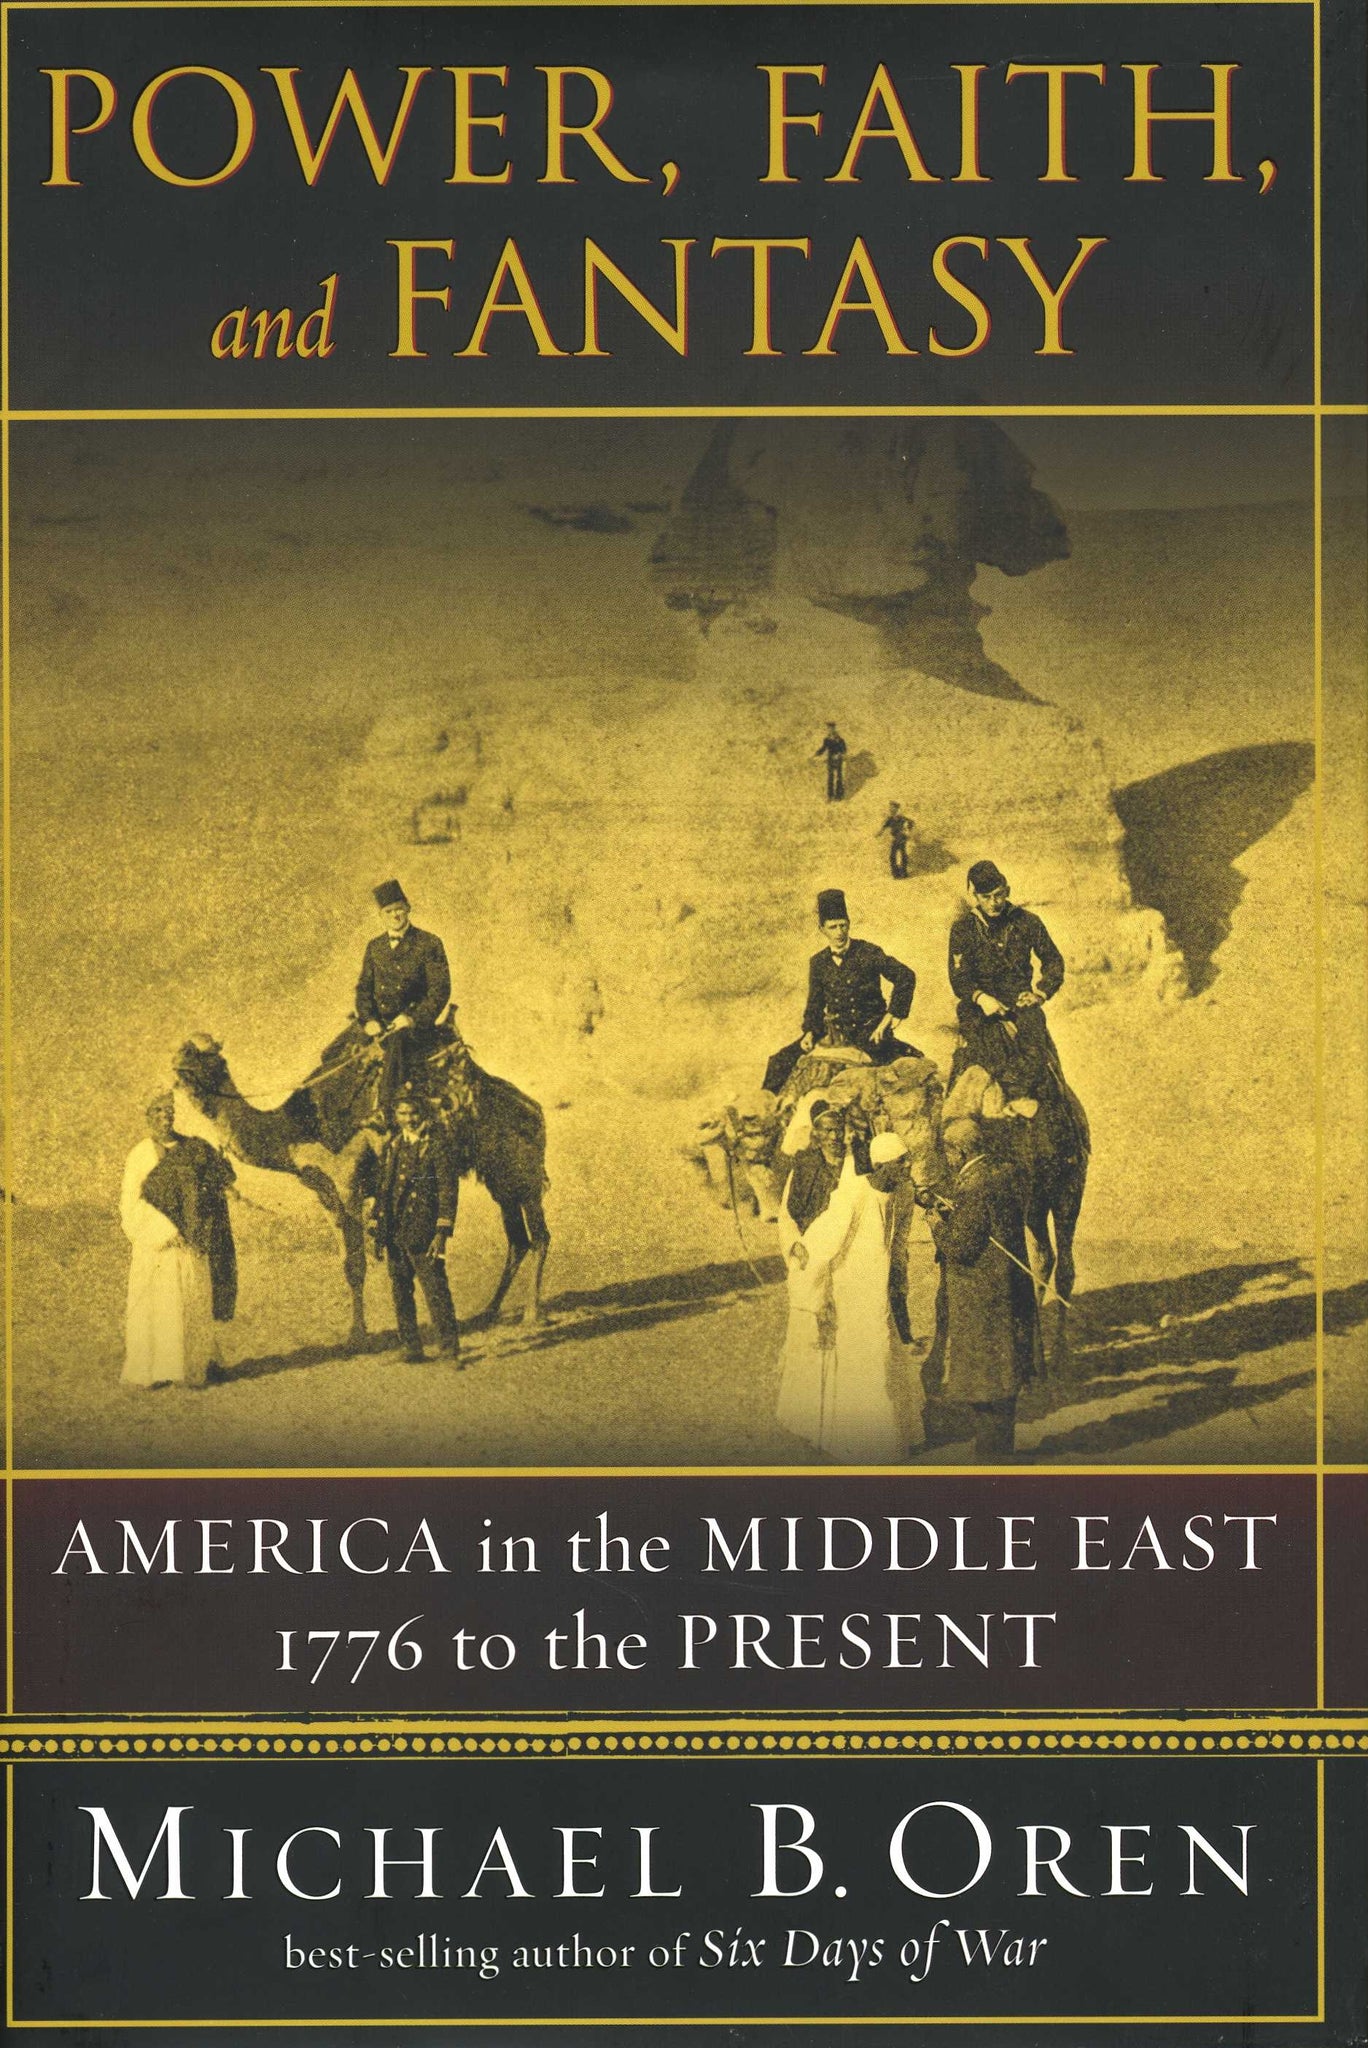 POWER, FAITH, AND FANTASY: America in the Middle East 1776 to the present